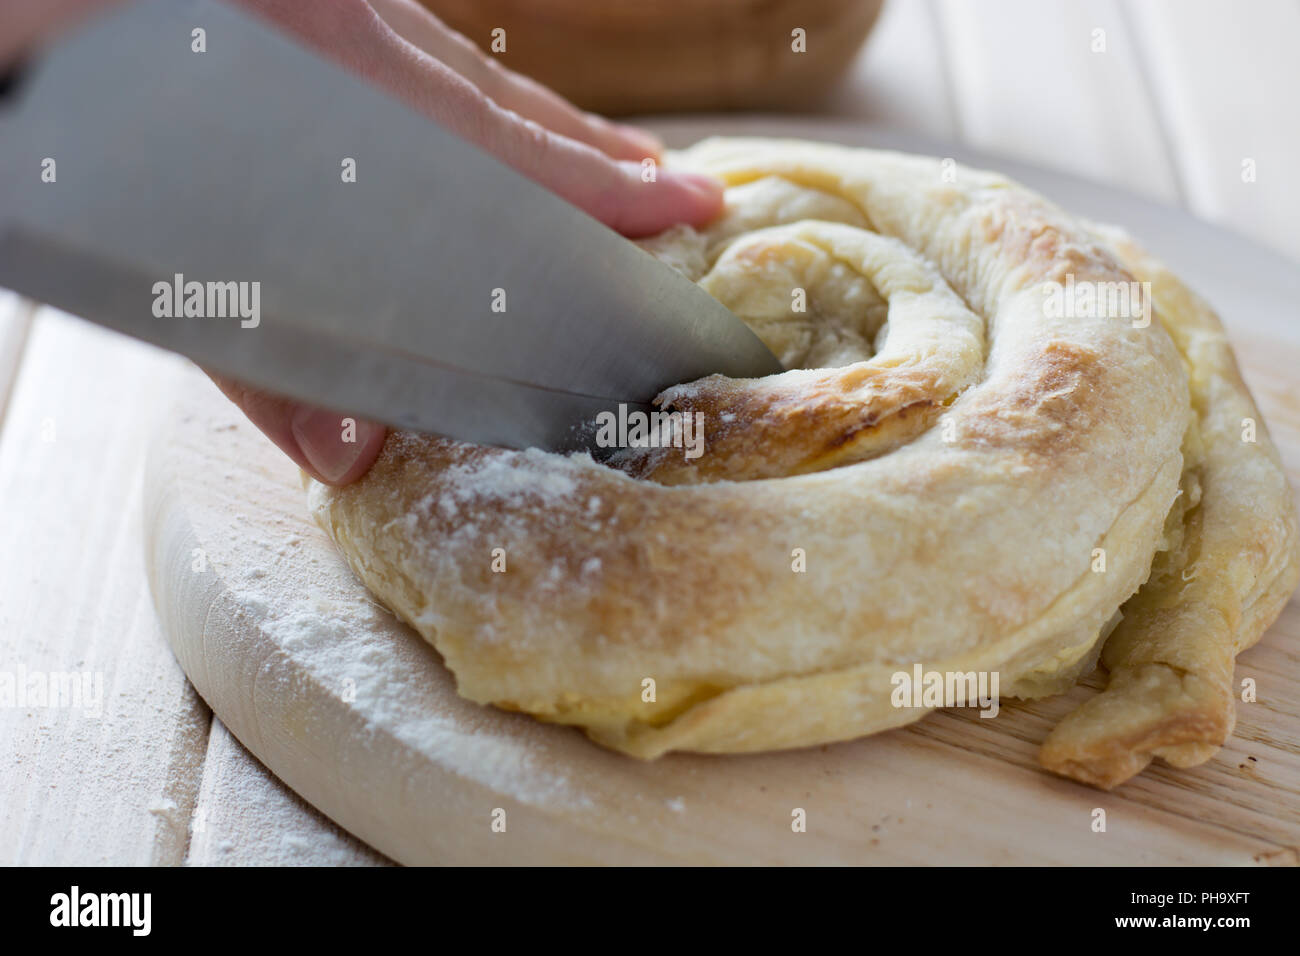 Female hands cutting freshly baked cheese pie Stock Photo